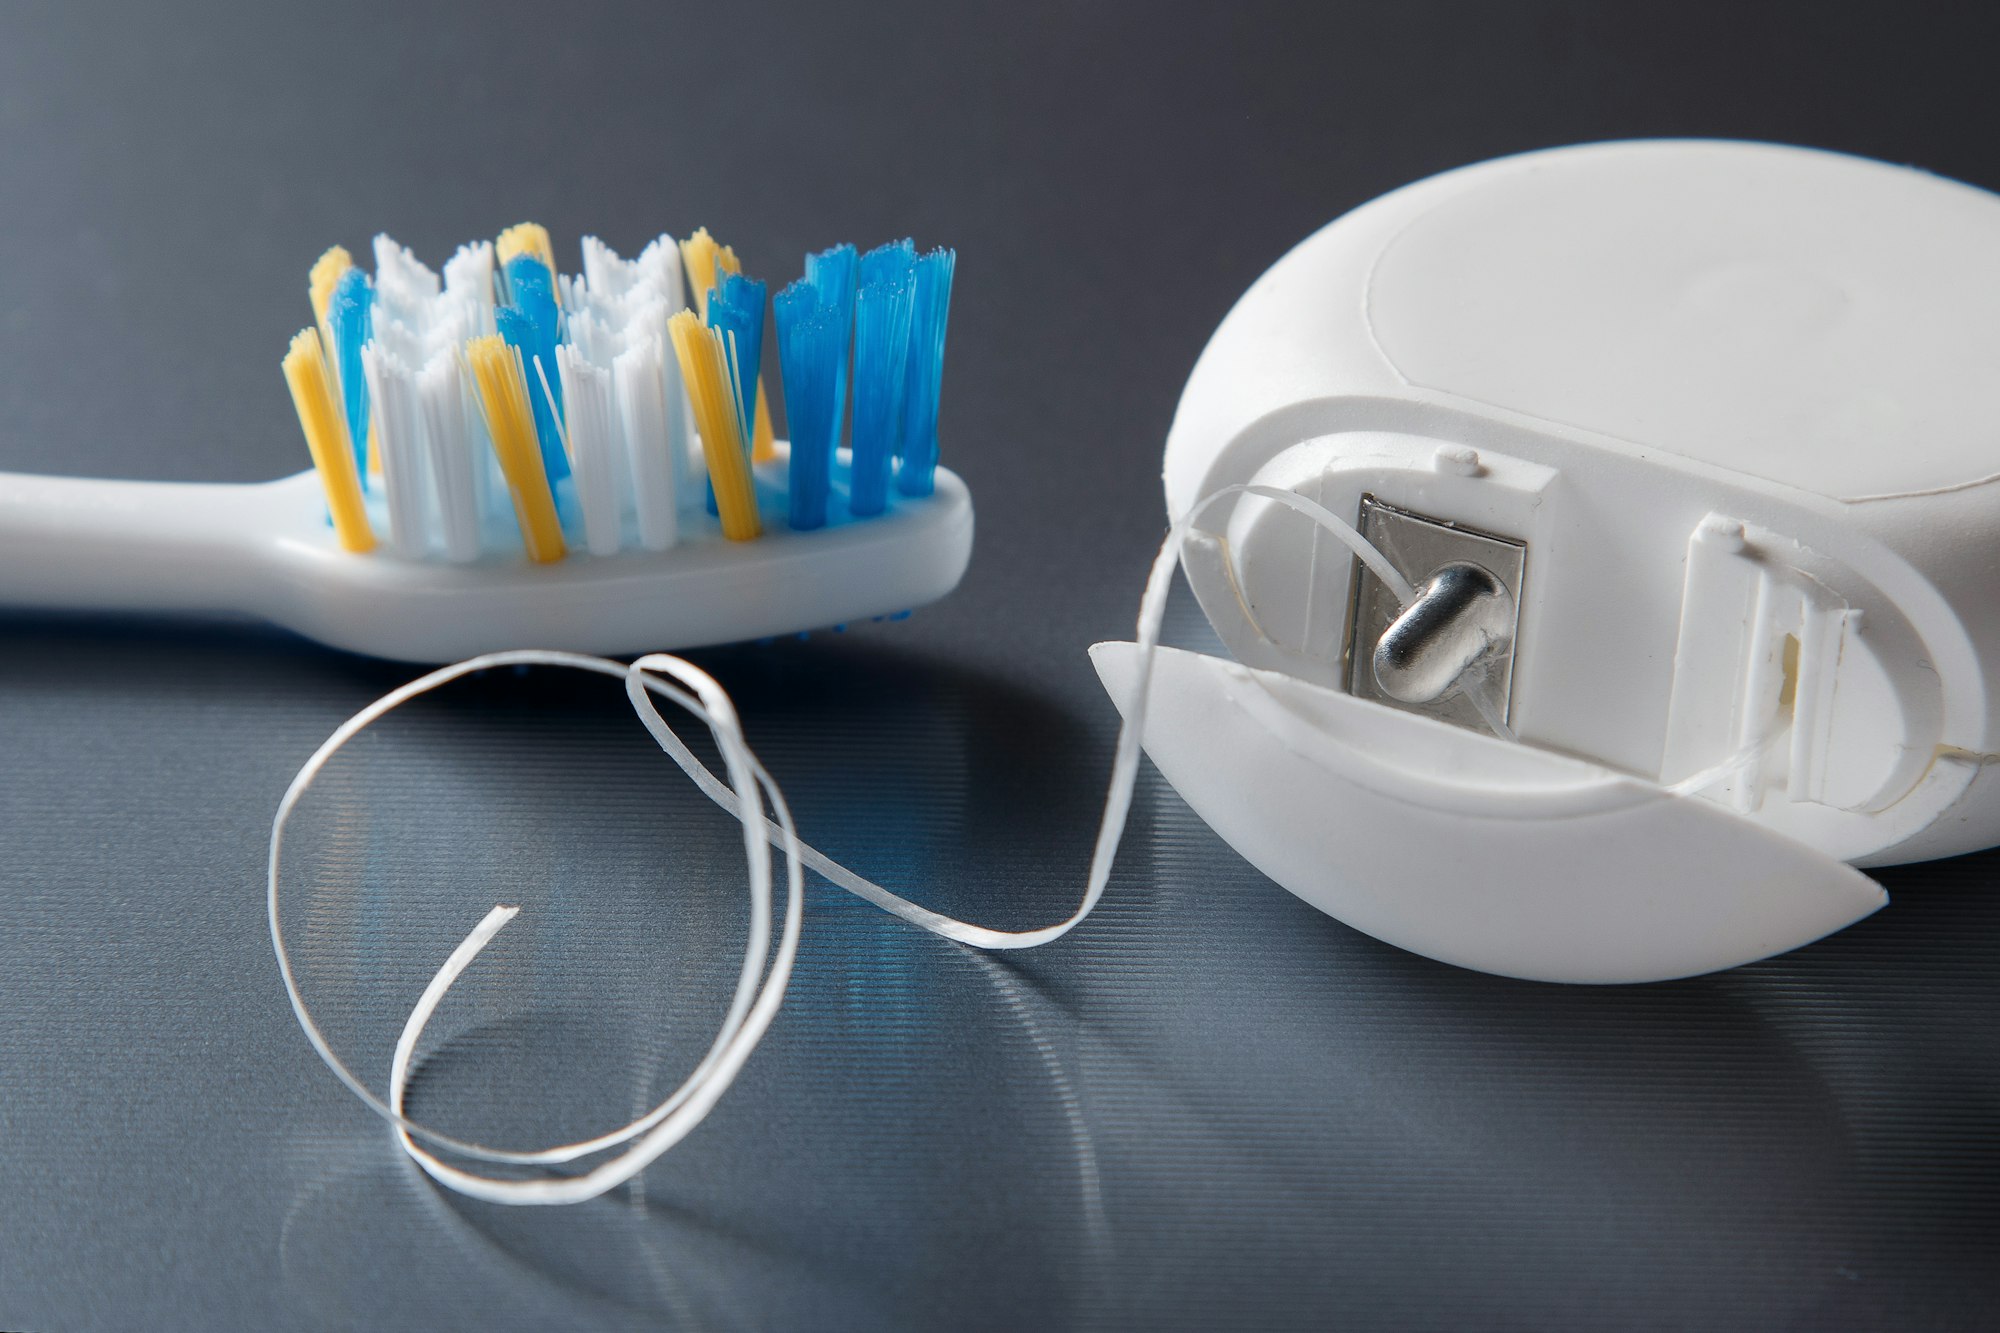 Essential dental care tools including toothbrush and floss, perfect for maintaining the longevity of dental implants at Dalin Dental Associates.